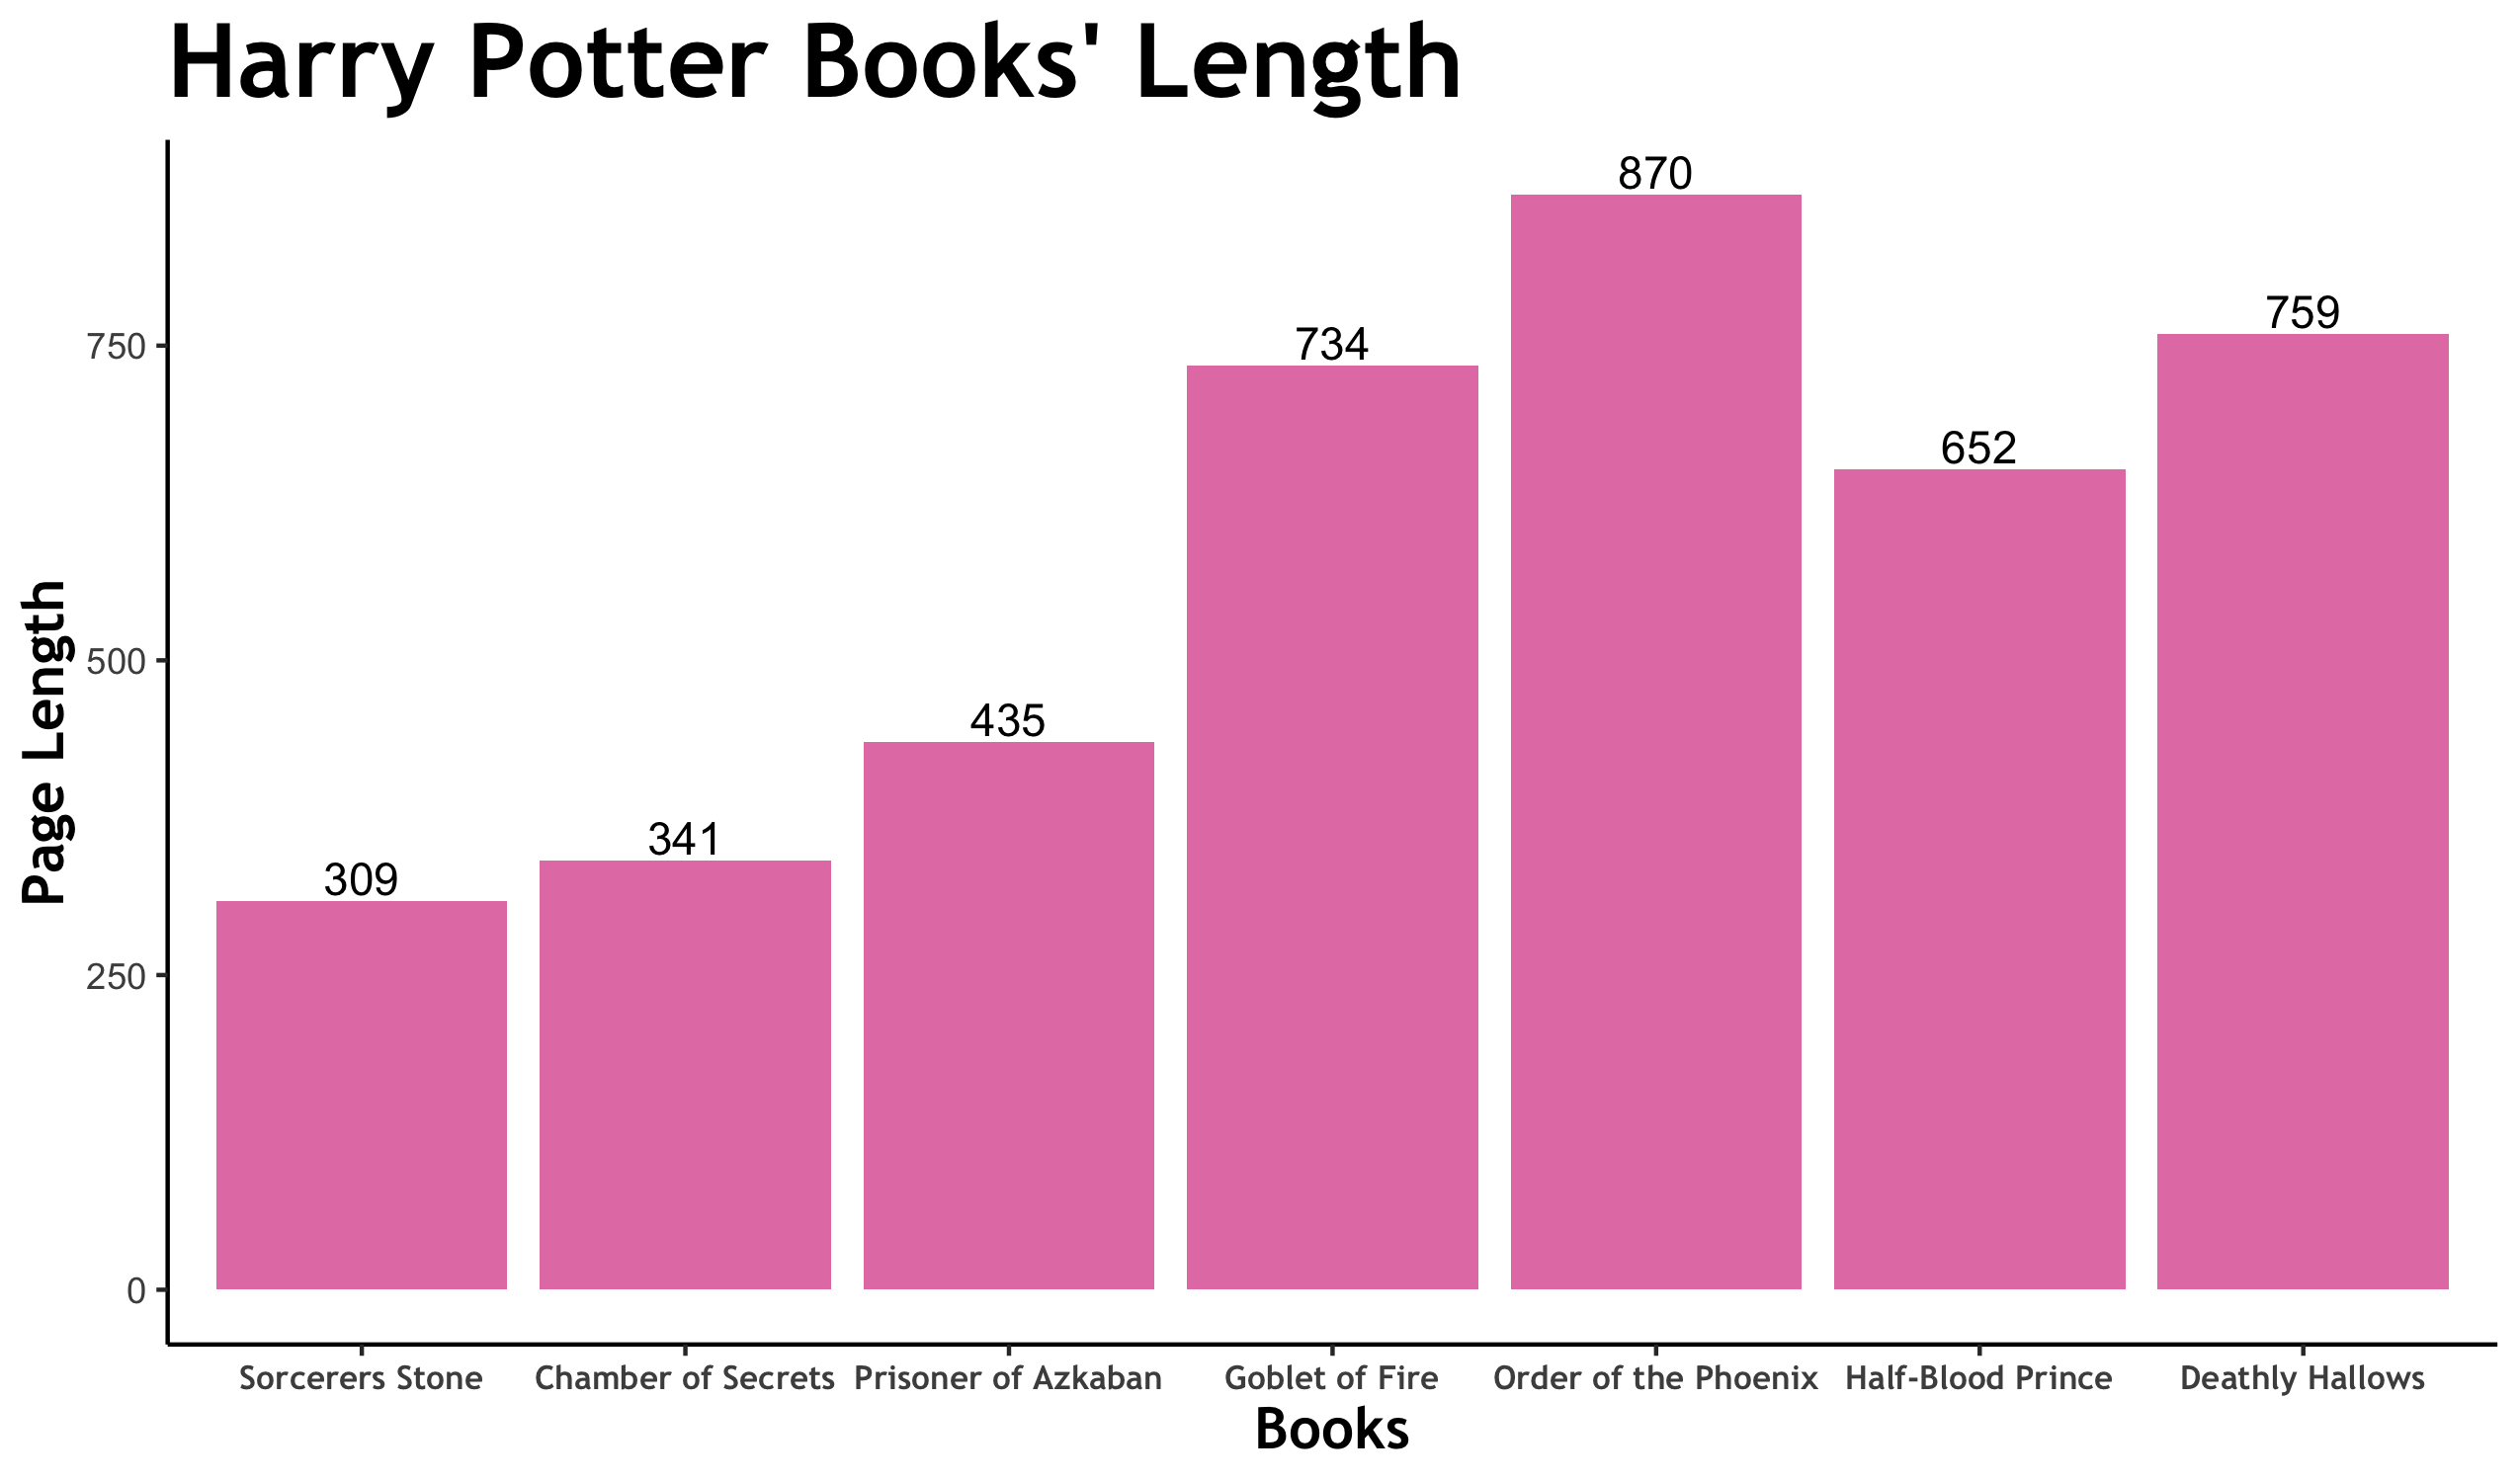 How long are the Harry Potter books?